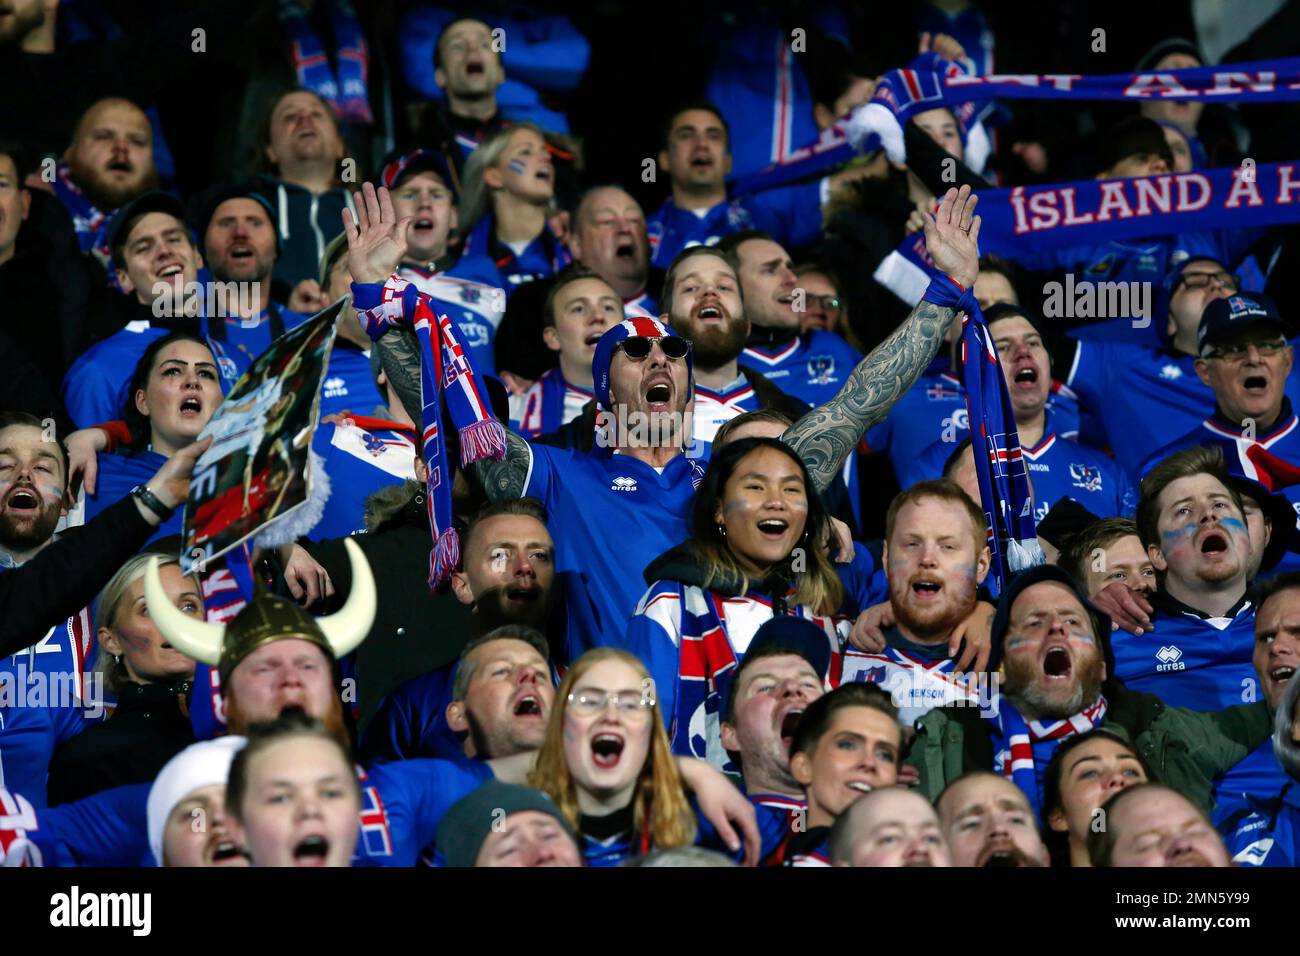 FILE - In this file photo from Oct. 9, 2017, Iceland's fans celebrate their team's victory against Kosovo, following the World Cup Group I qualifying soccer match between Iceland and Kosovo in Reykjavik, Iceland. (AP Photo/Brynjar Gunnarsson, File) Banque D'Images